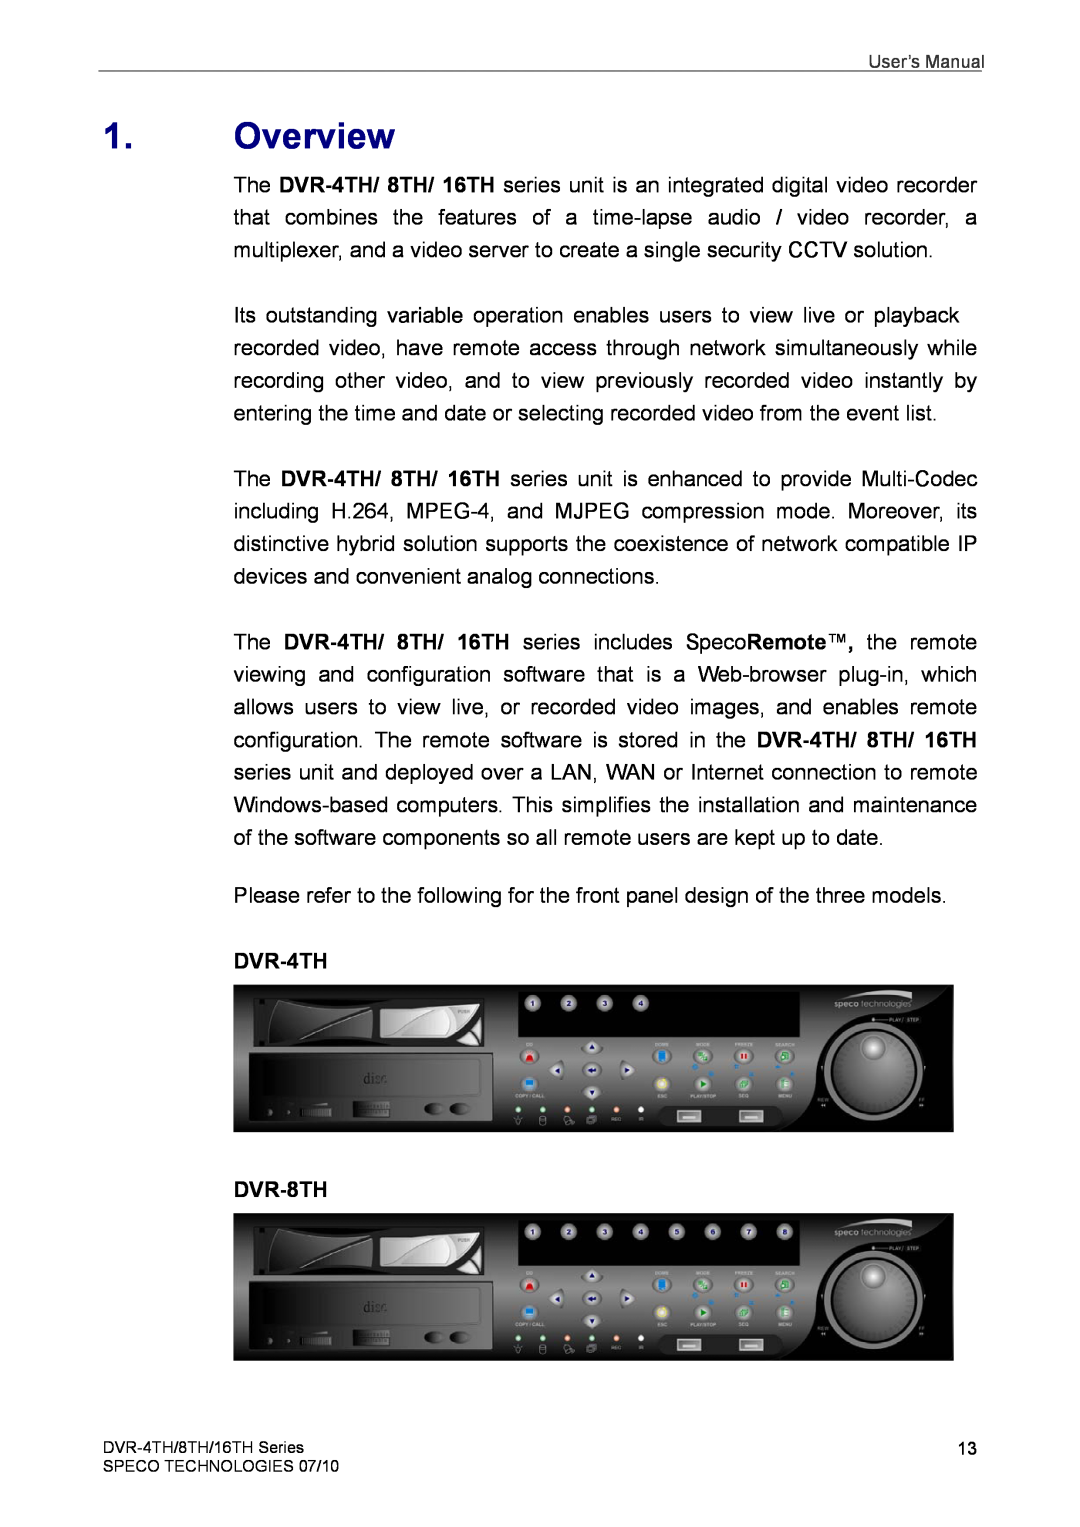 Speco Technologies 16TH user manual Overview, DVR-4TH DVR-8TH 